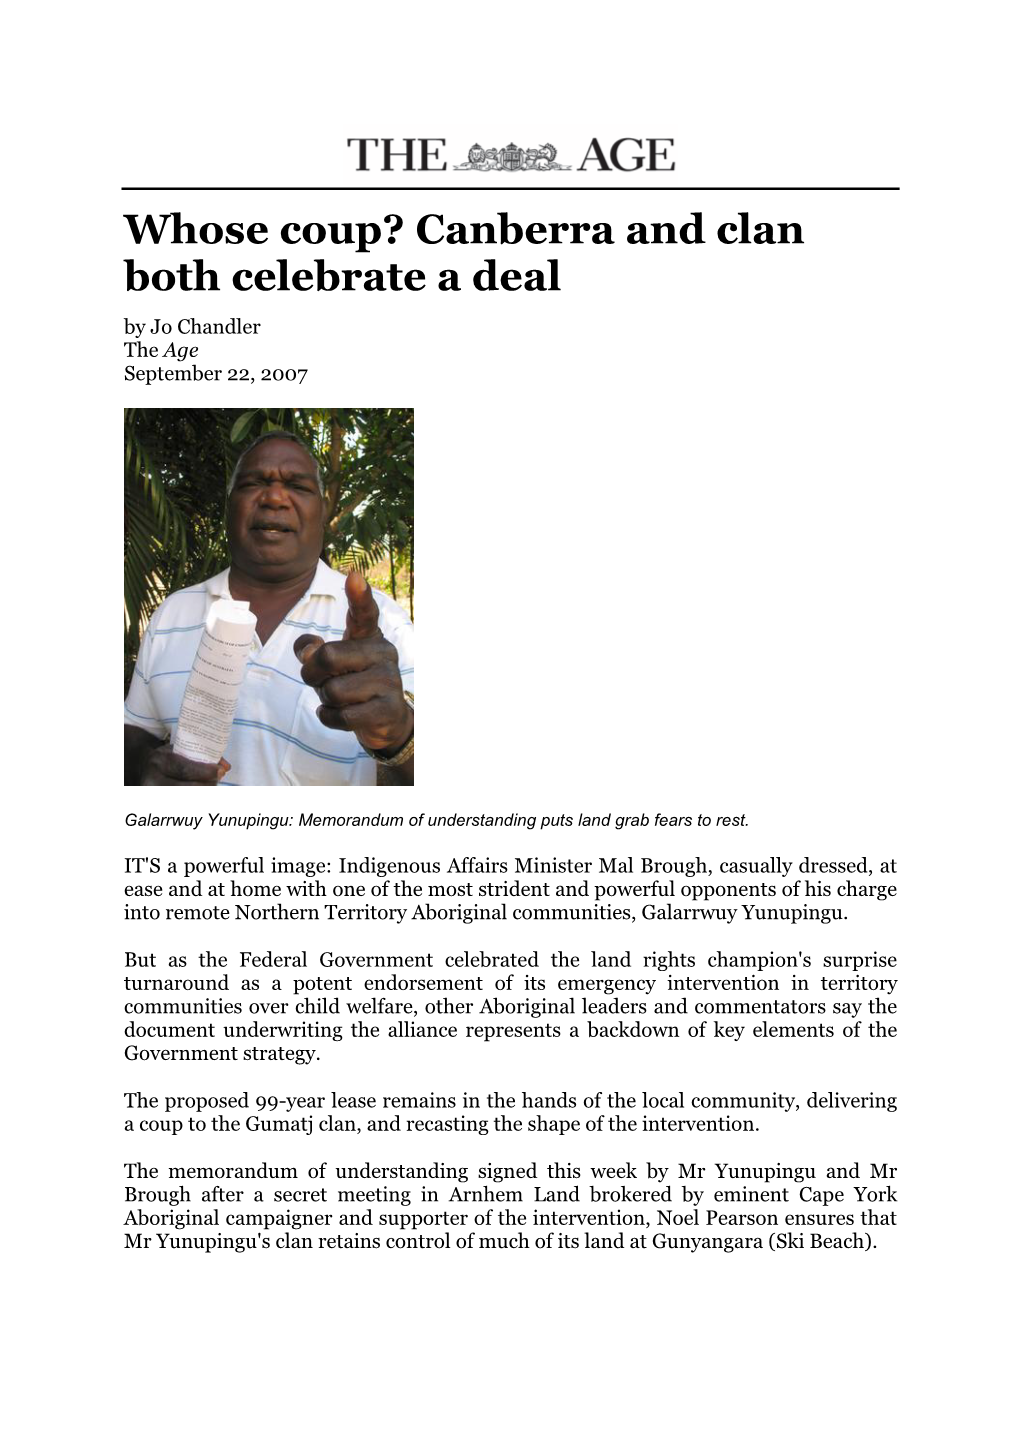 Whose Coup? Canberra and Clan Both Celebrate a Deal by Jo Chandler the Age September 22, 2007